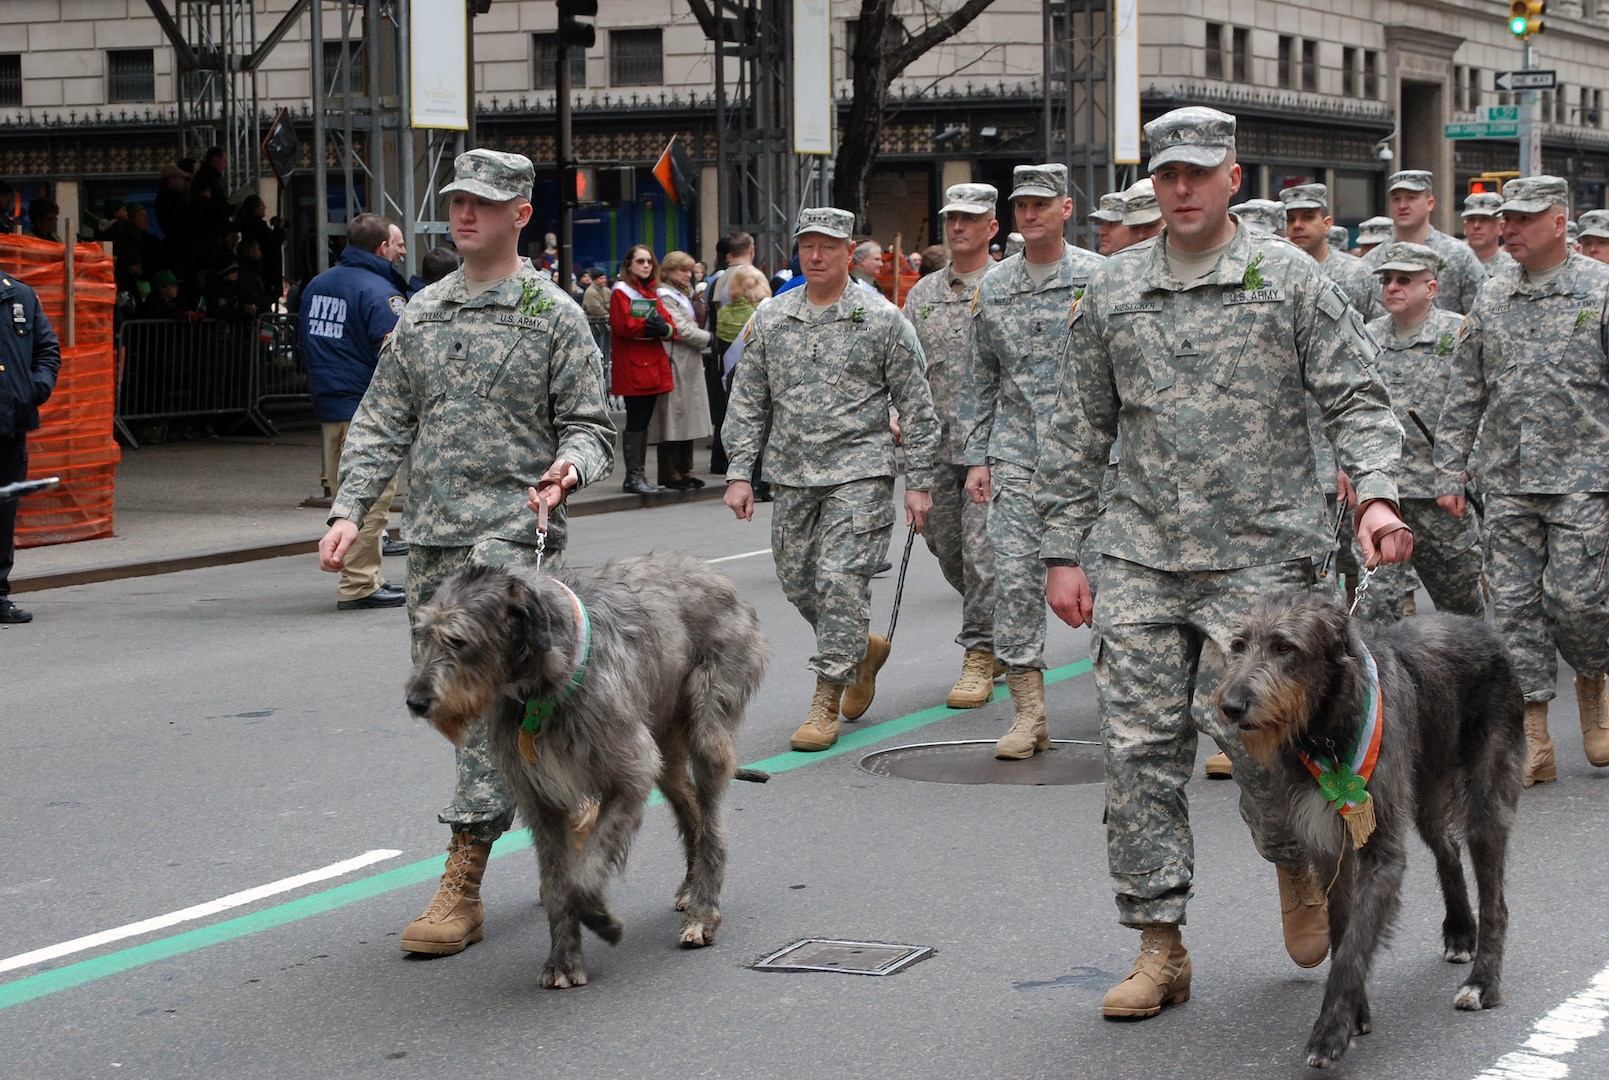 New York Army National Guard Soldiers of the 1st Battalion, 69th Infantry lead two Irish Wolfhounds, the official mascots of the battalion, during the 2013 St. Patrick's Day Parade up 5th Avenue.